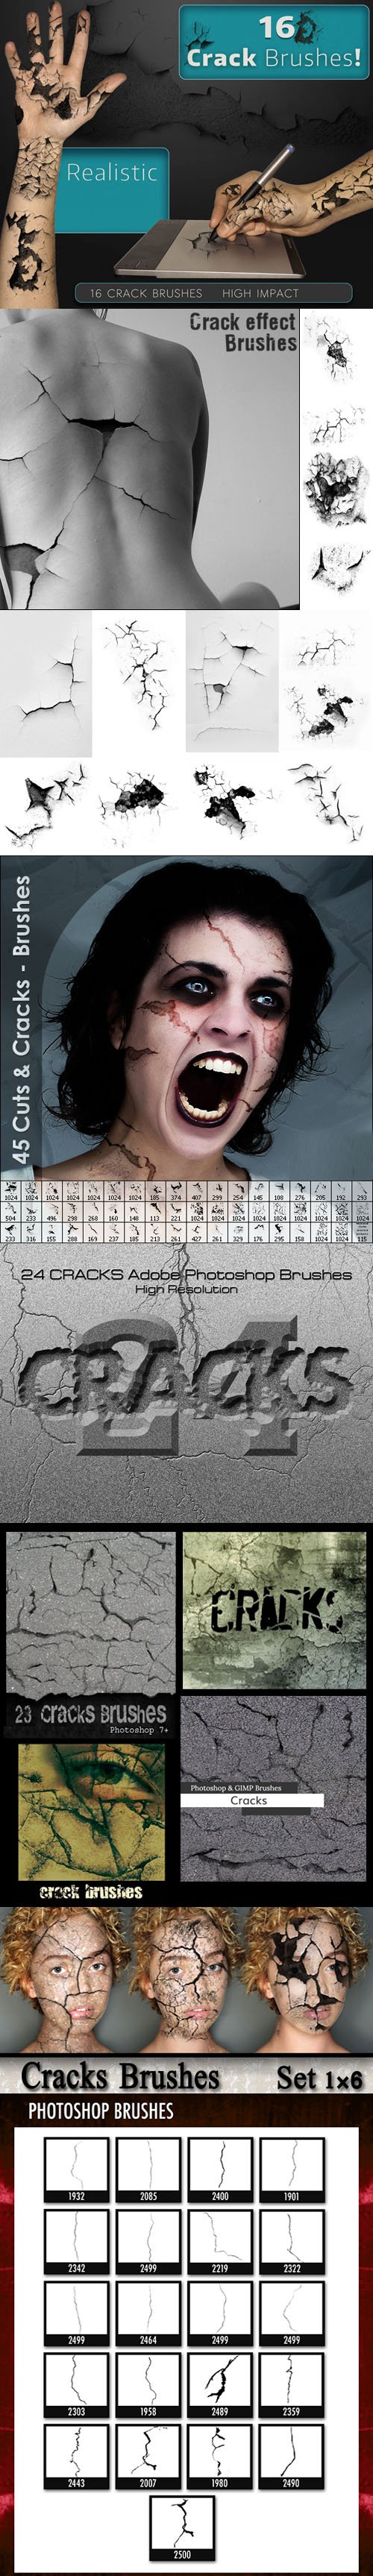 180+ Pretty Cuts and Cracks Brushes for Photoshop & Gimp